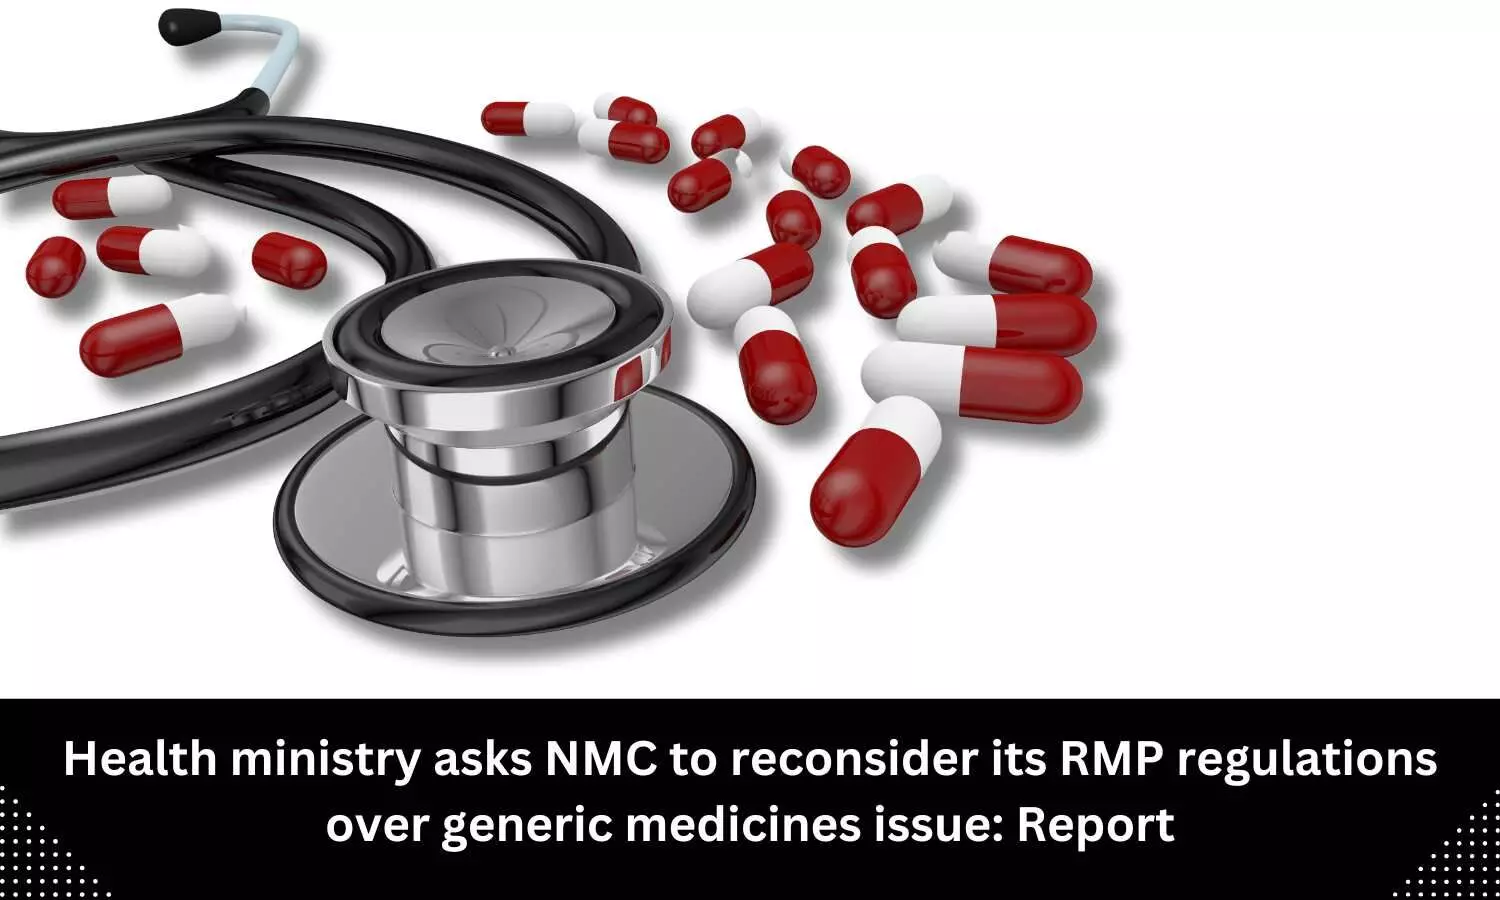 Health ministry asks NMC to reconsider its RMP regulations over generic medicines issue: Report